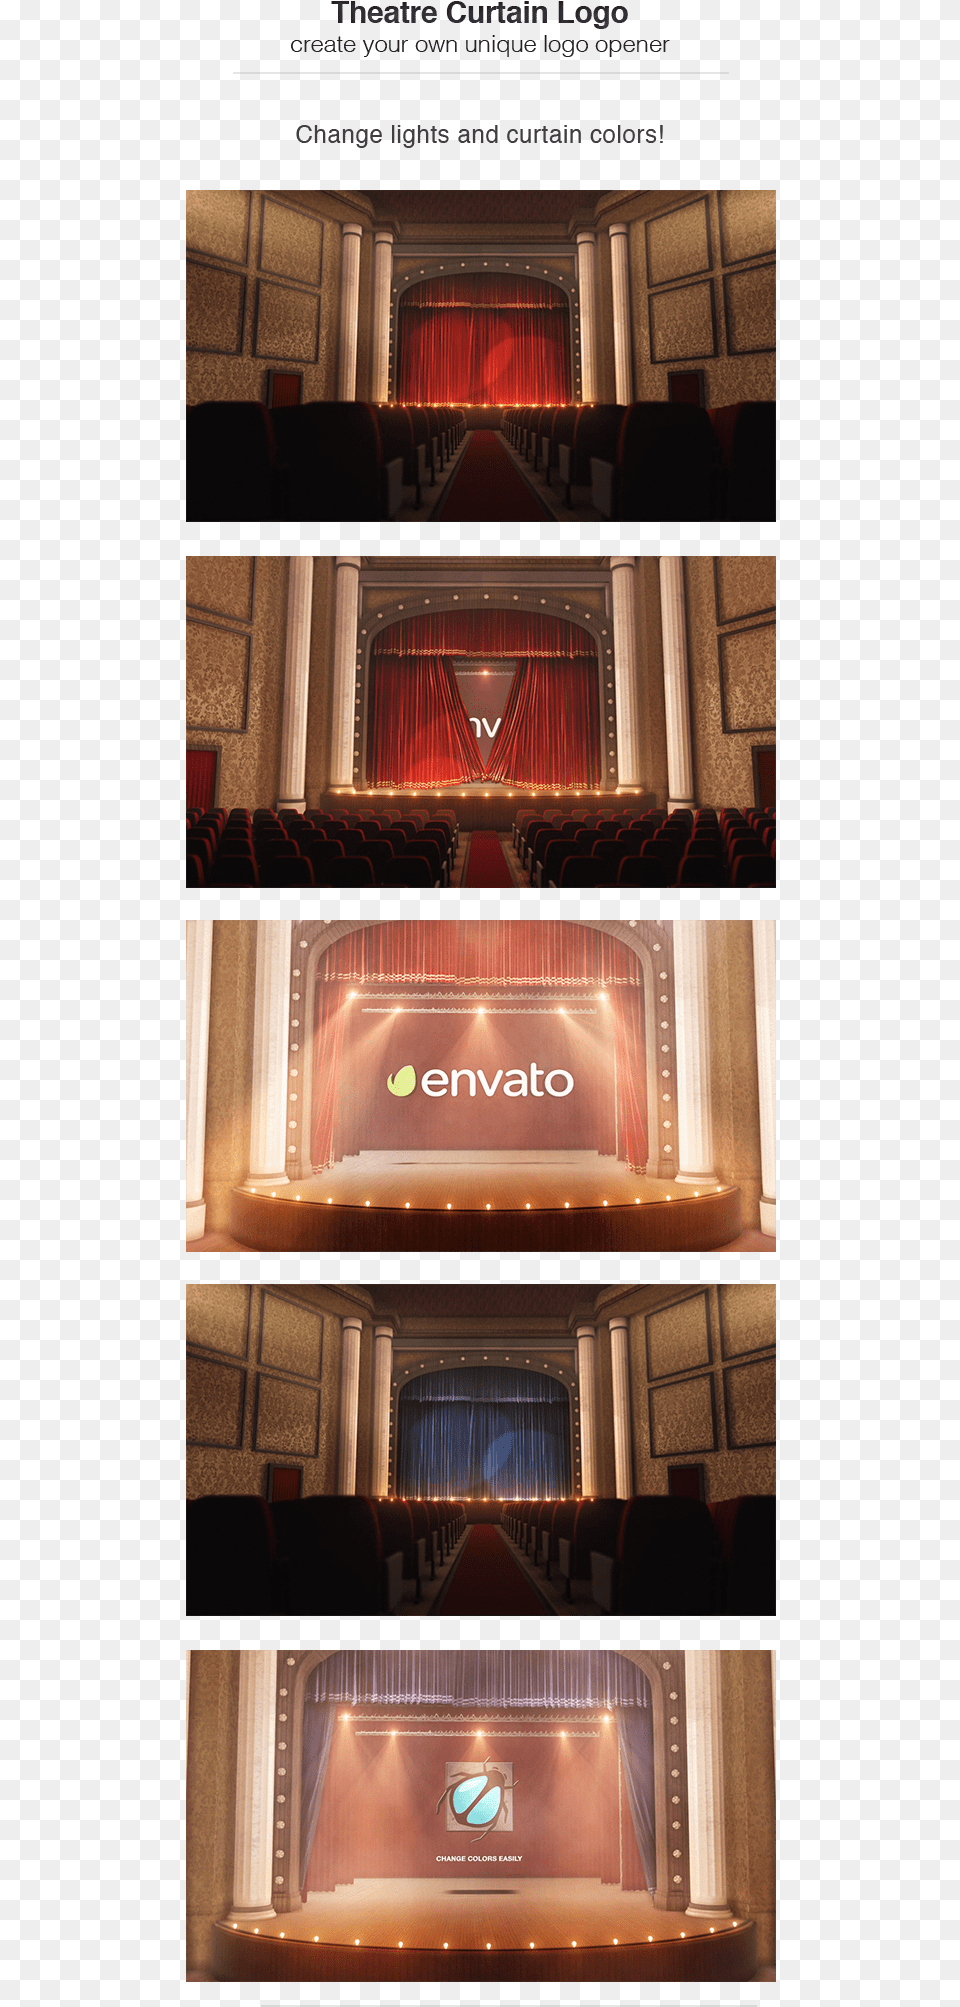 Theatre Curtain Logo Is A Cinematic Curtain Opener Stage, Art, Collage, Indoors, Theater Free Transparent Png